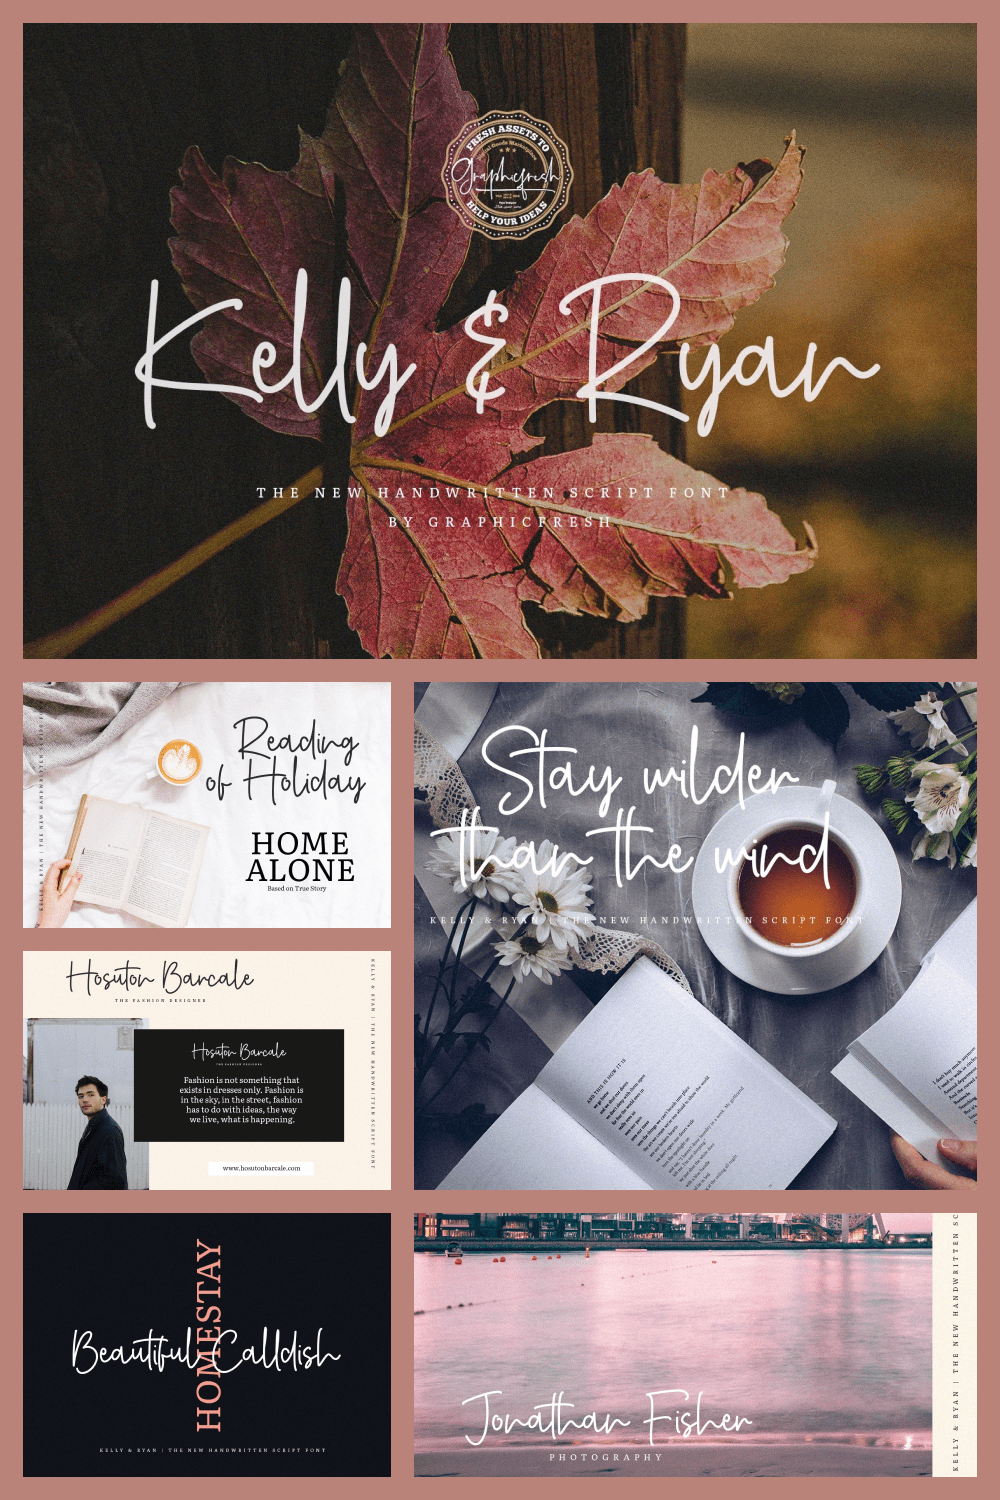 Kelly and Ryan - the handwritten font.